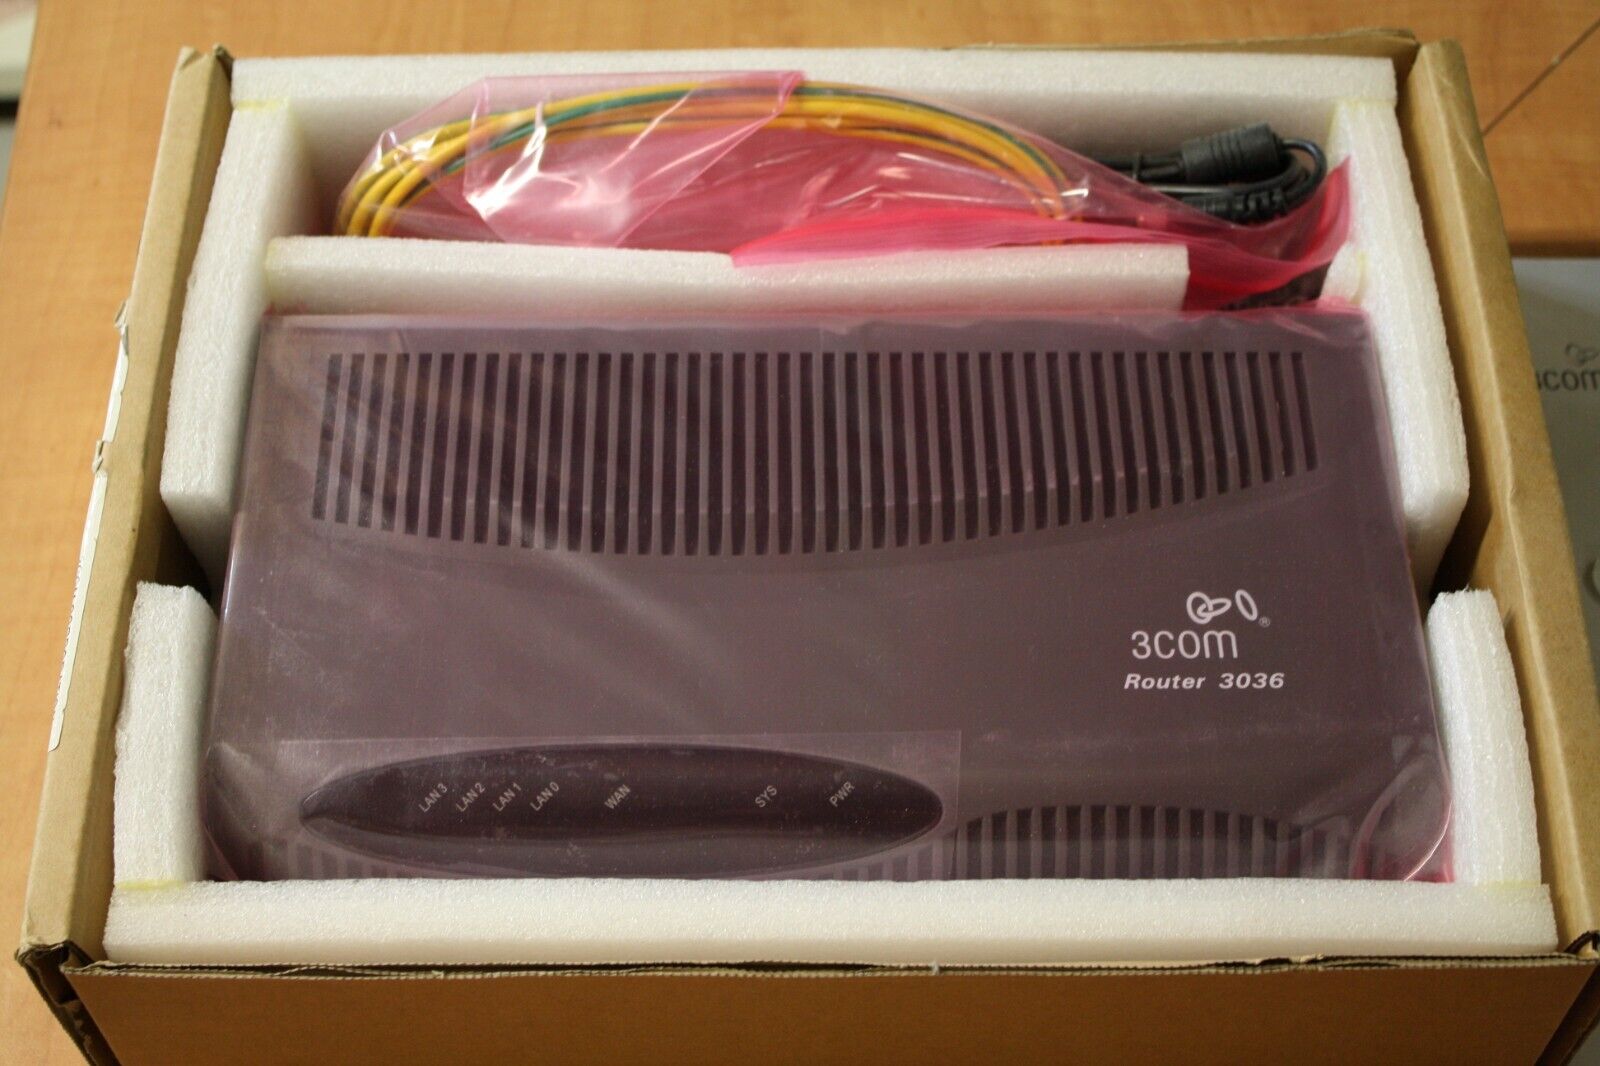 3com 3C13636 3036 wired router brand new sealed